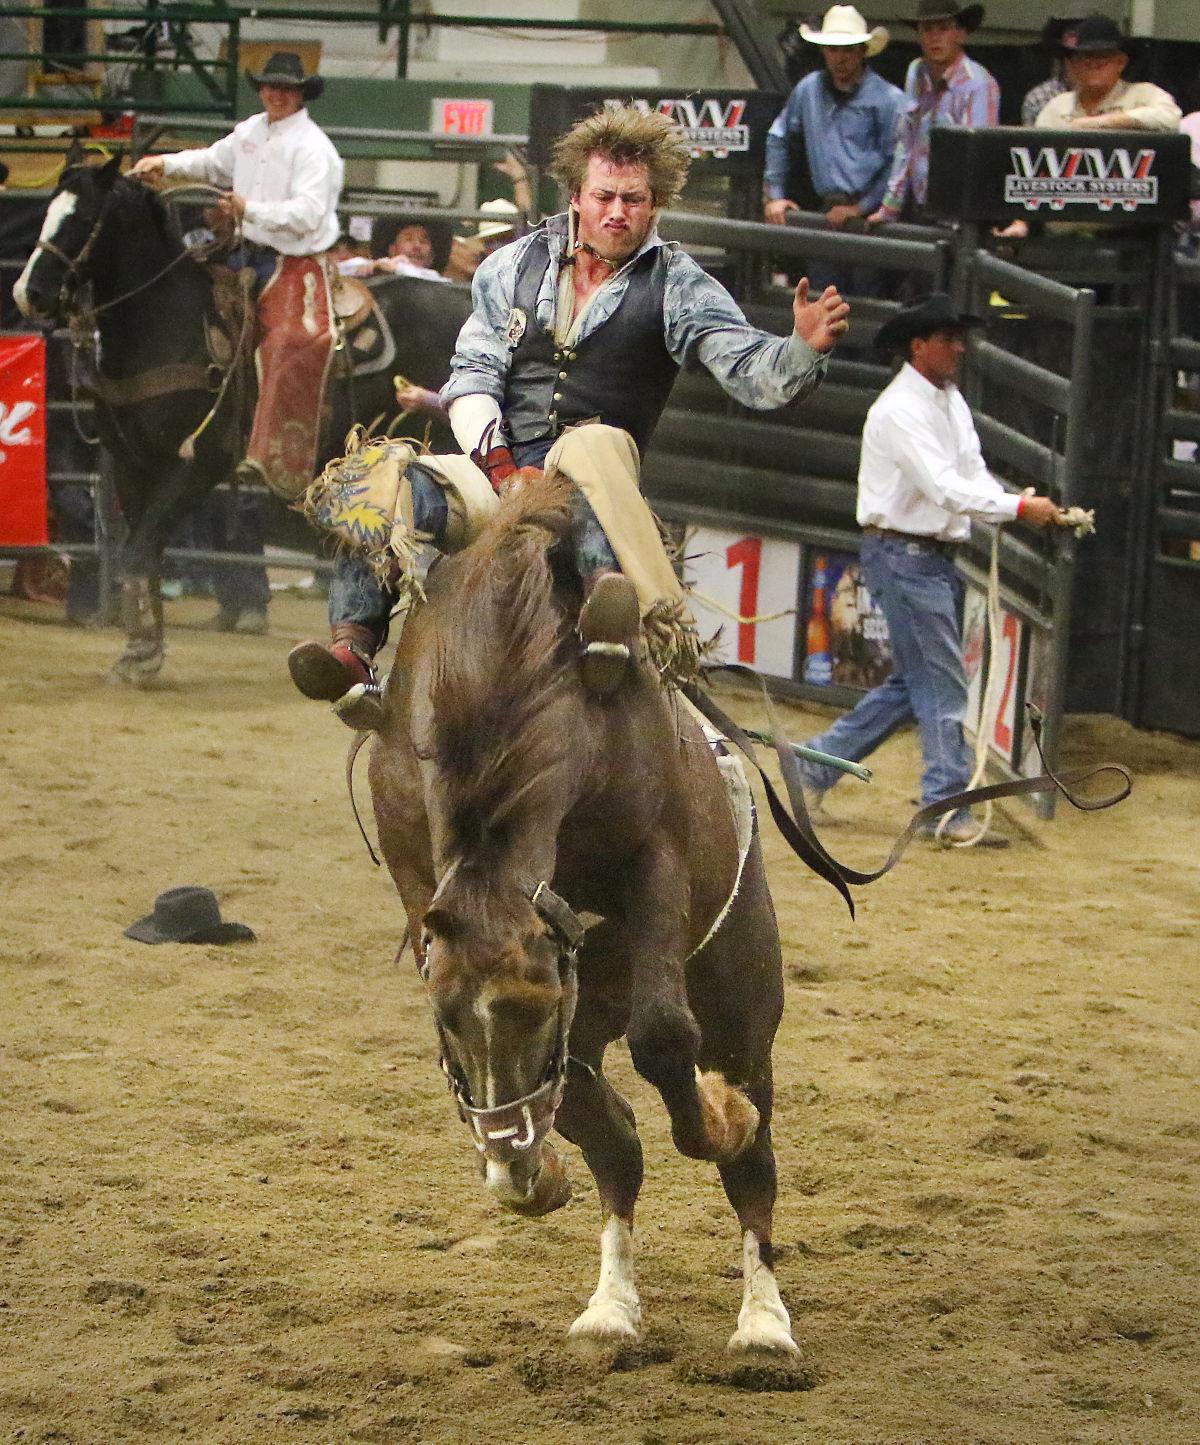 Action Photos From The Northern Rodeo Finals in Butte